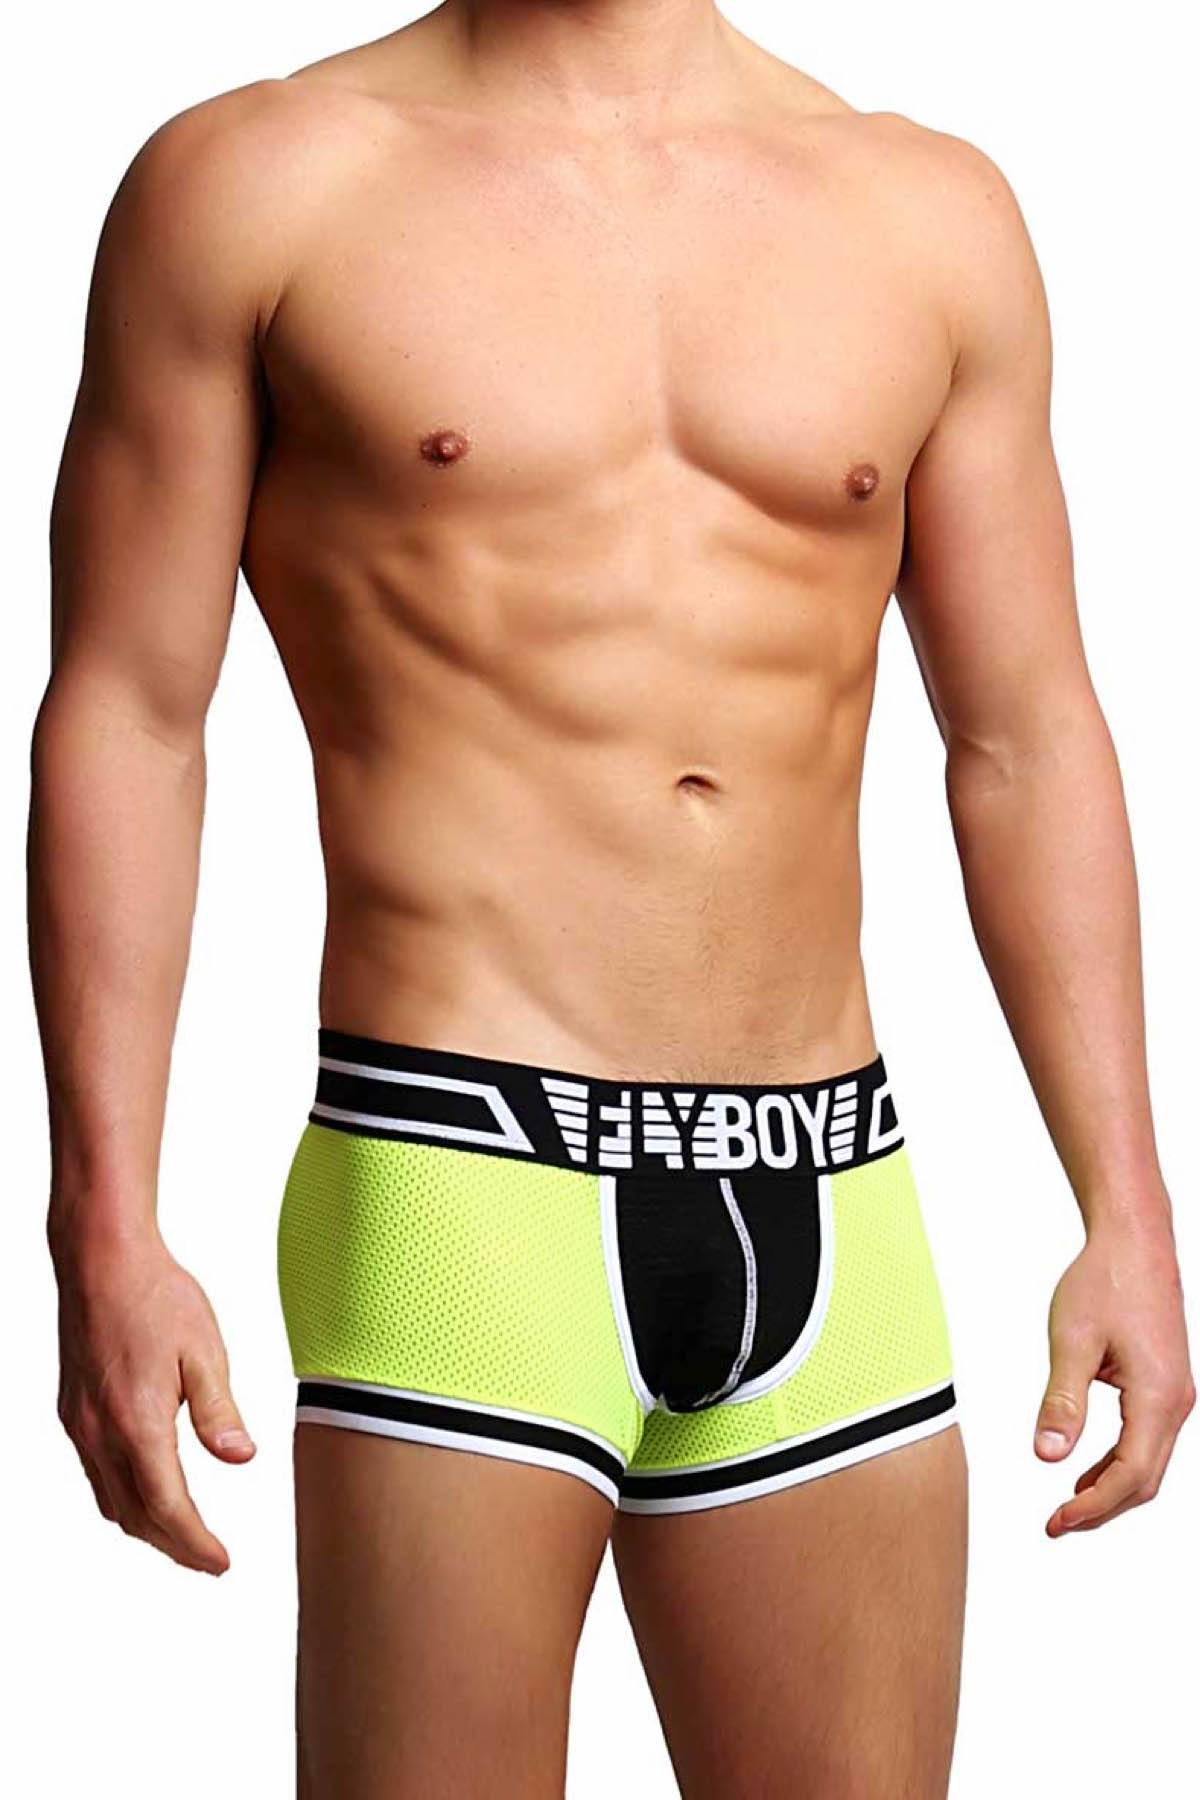 FlyBoy Chartreuse Tennis Trunk